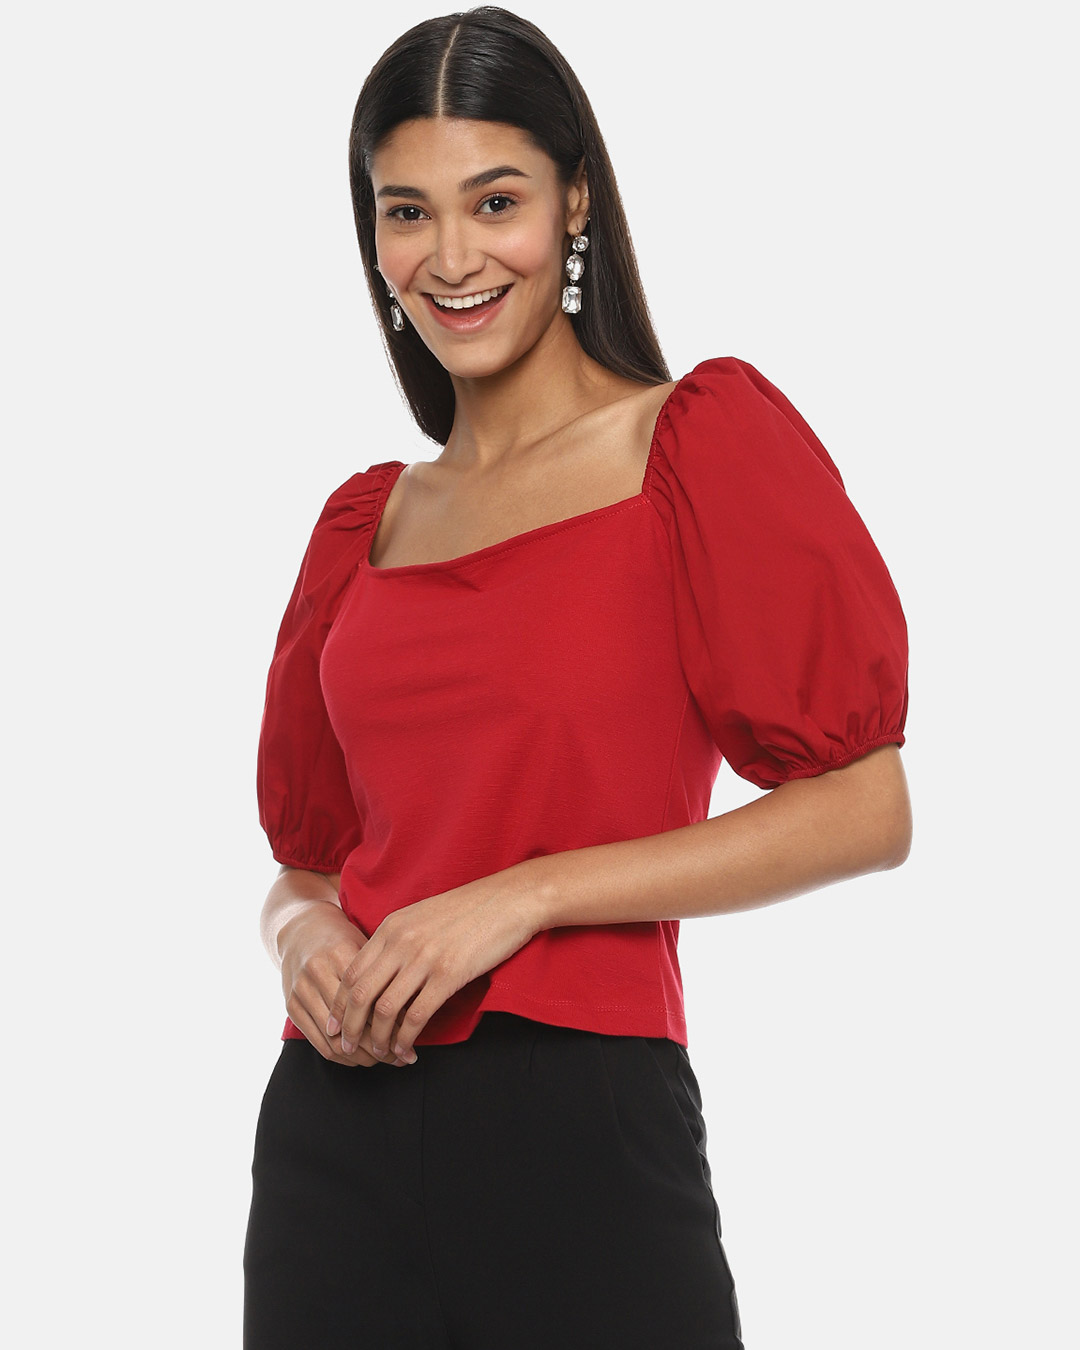 Shop Women's Red Stylish Casual Top-Back